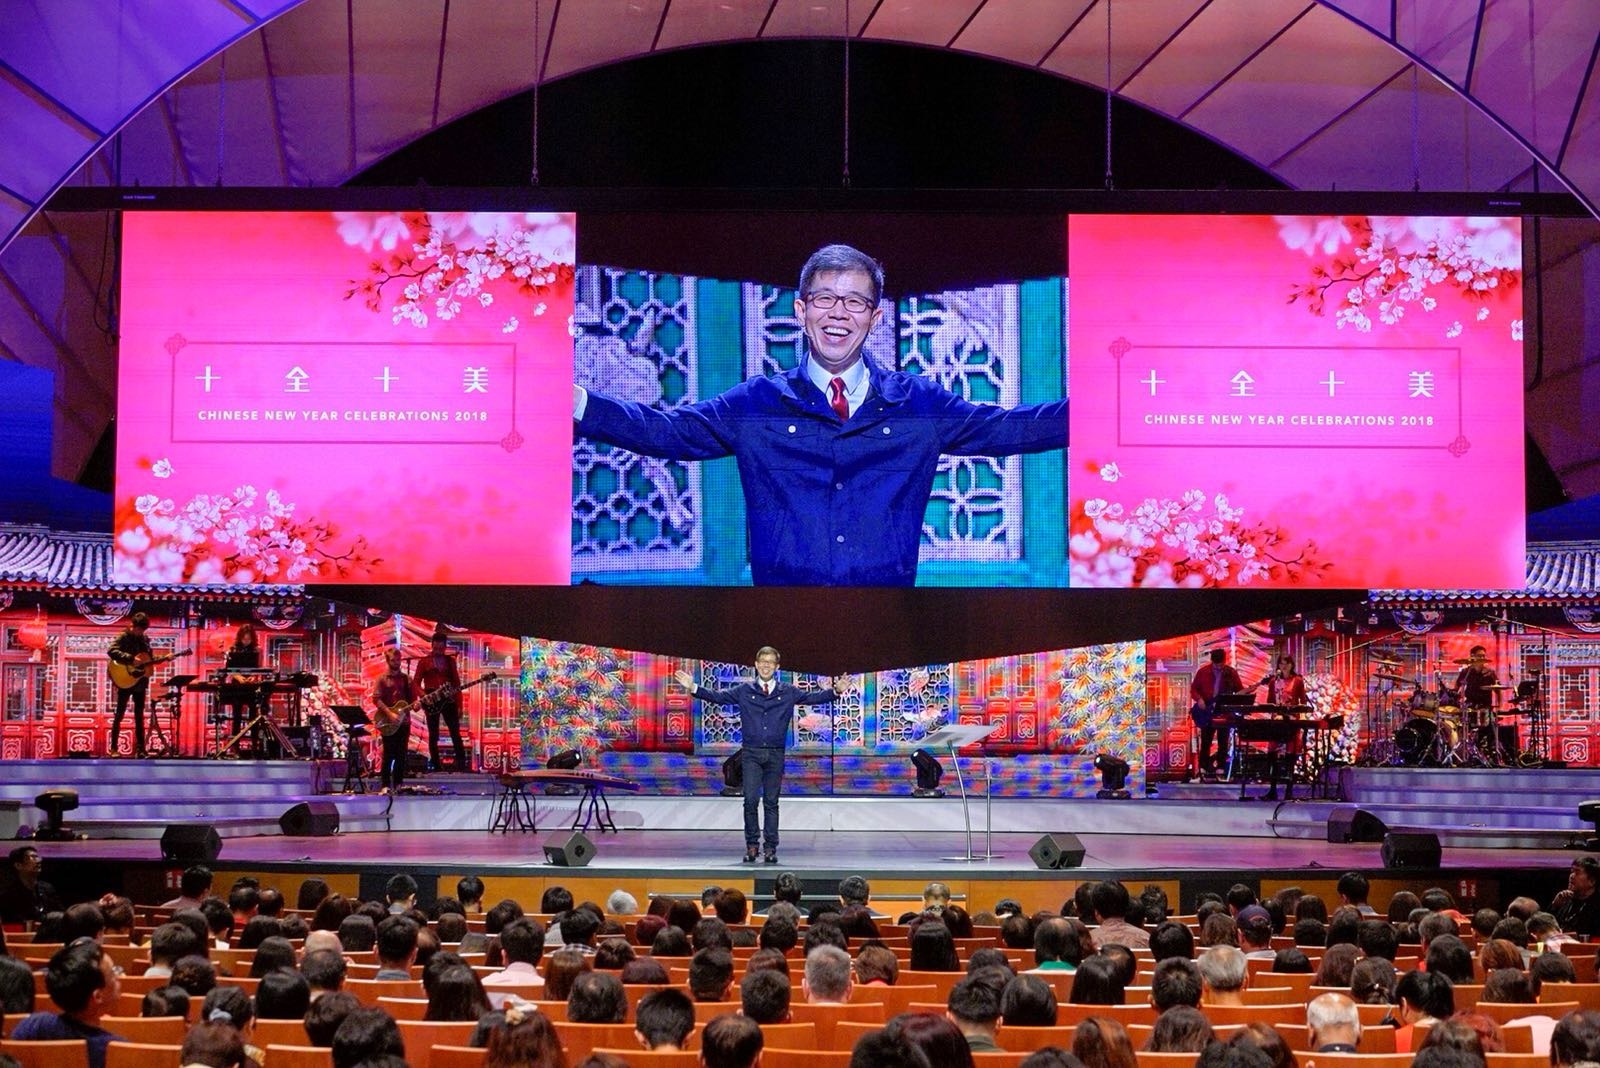 Pastor Mark Ng taught us in this powerful Chinese New Year sermon that God still loves us just the same even when we fail and that we can continue to receive His goodness and blessings. We need to be established in the truth that we are the righteousness of God in Christ! Image Credits: www.newcreation.org.sg